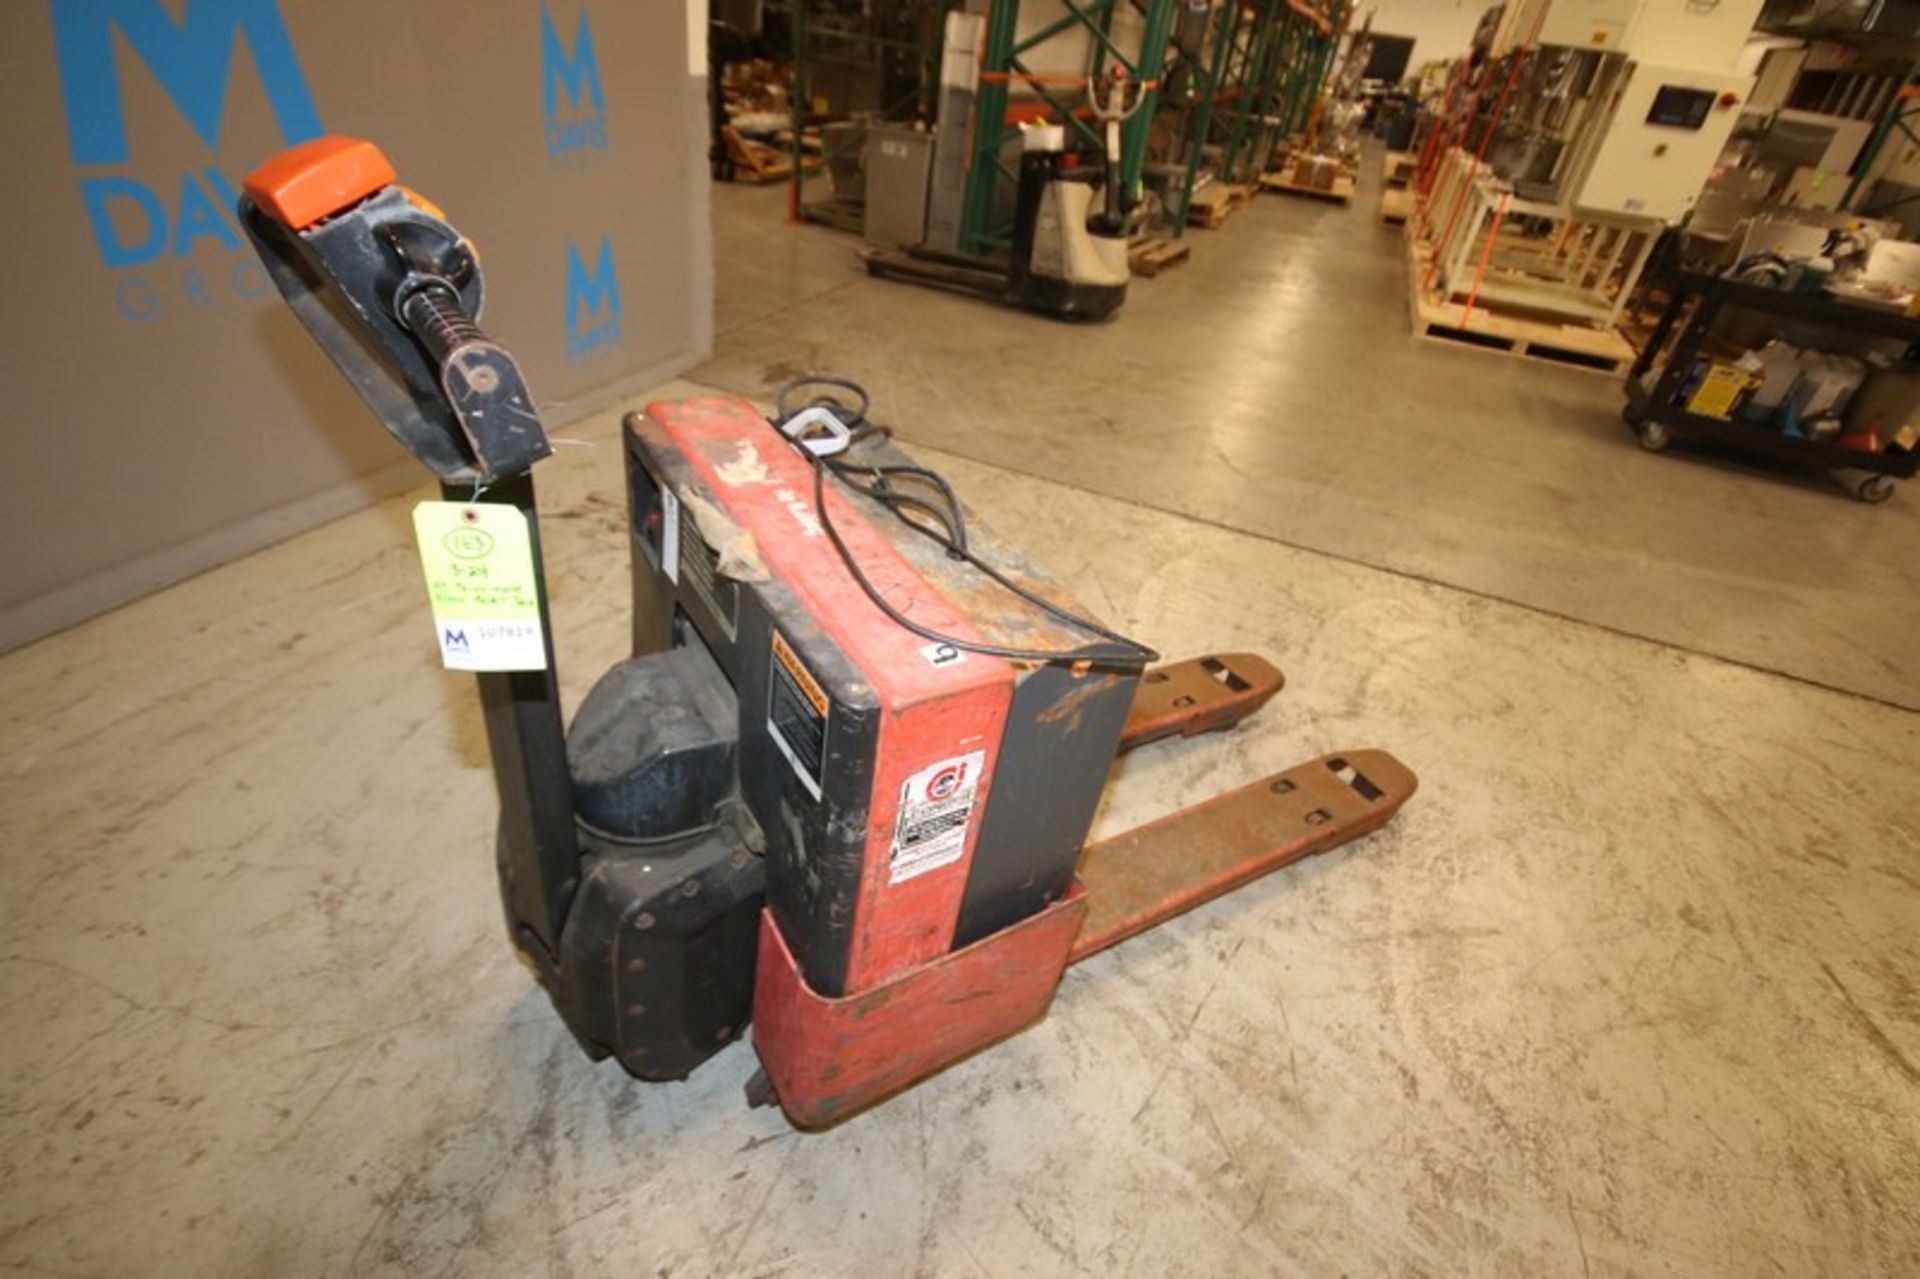 Prime Mover 4,500 lbs. 24V Electric Pallet Jack, Model PMX, PMX0027153005, with Self Contained - Image 2 of 4